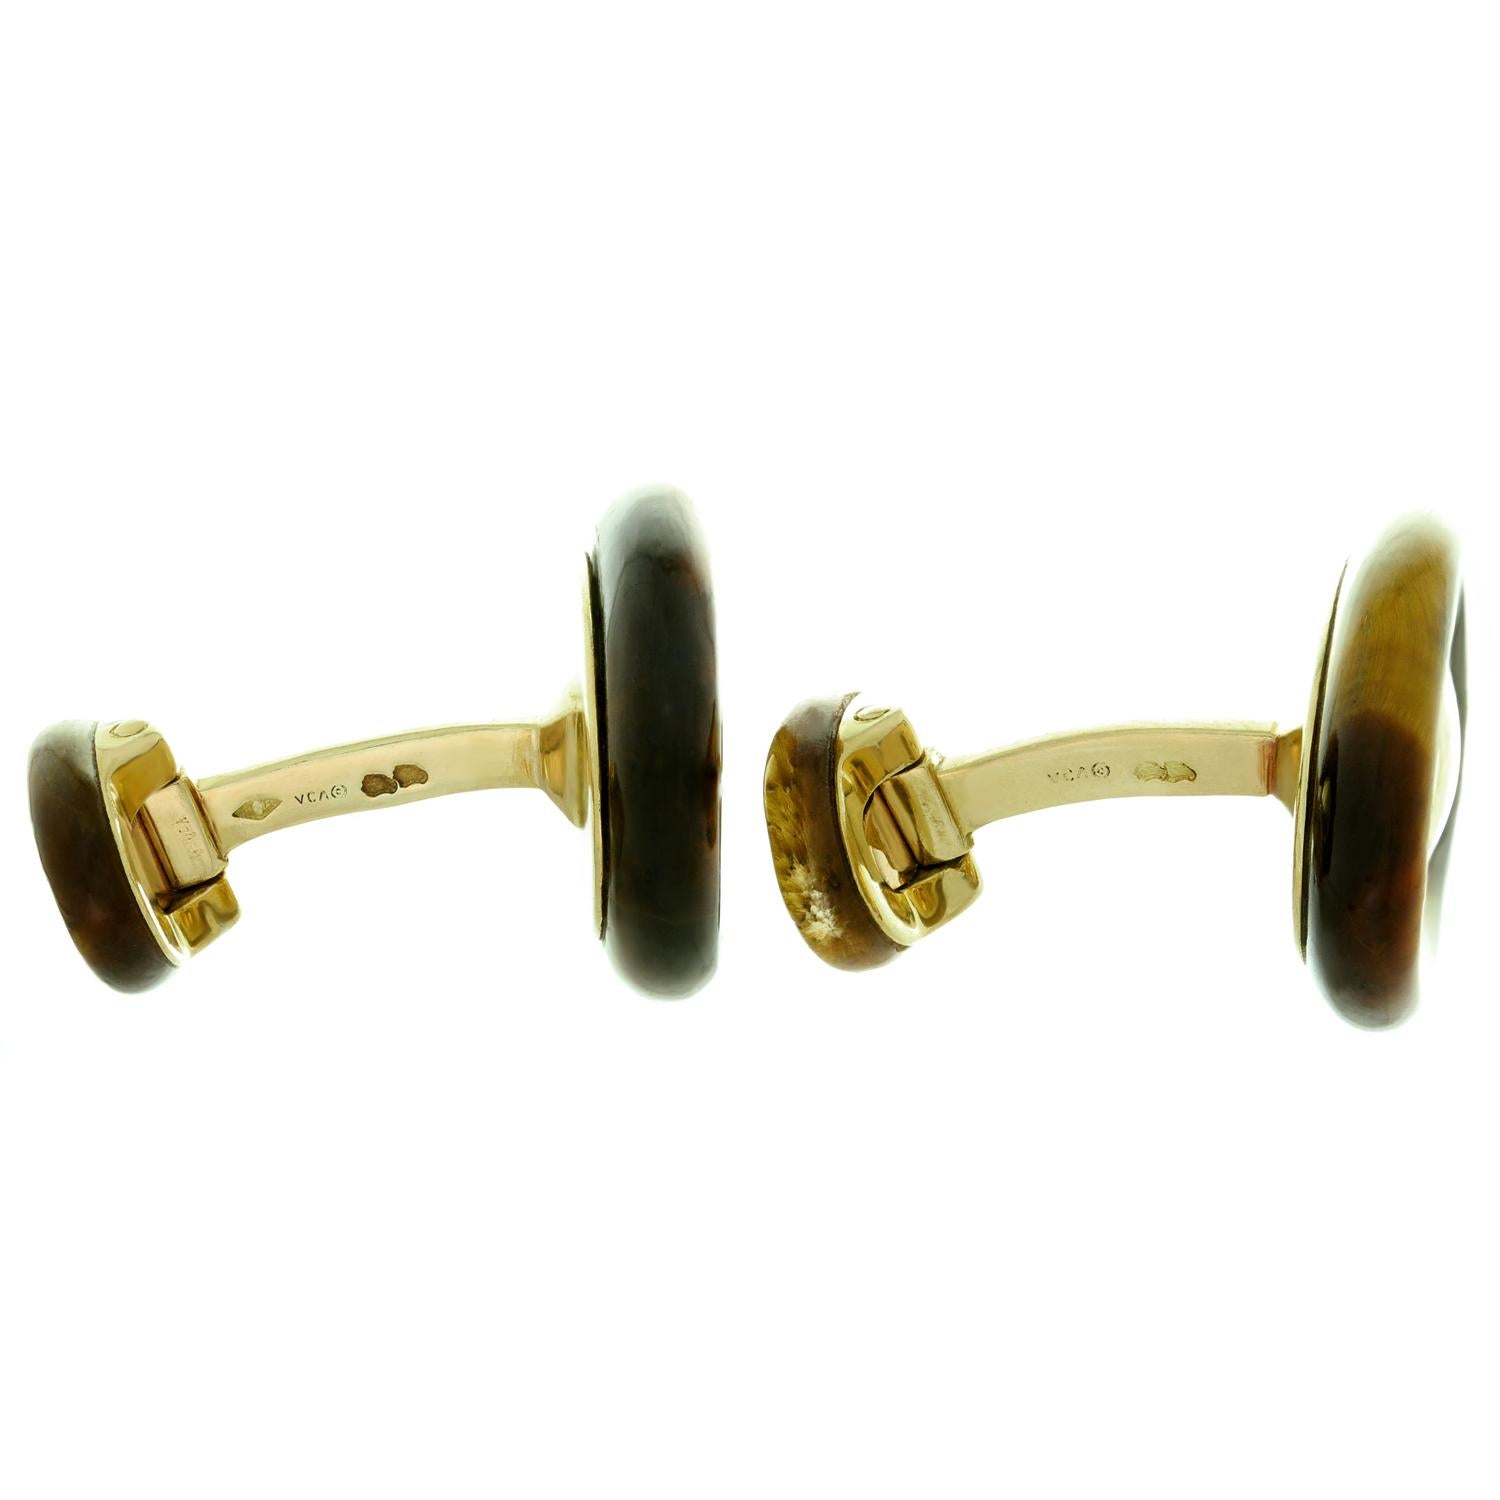 Van Cleef & Arpels 1970s Tiger's Eye Yellow Gold Cufflinks In Excellent Condition For Sale In New York, NY